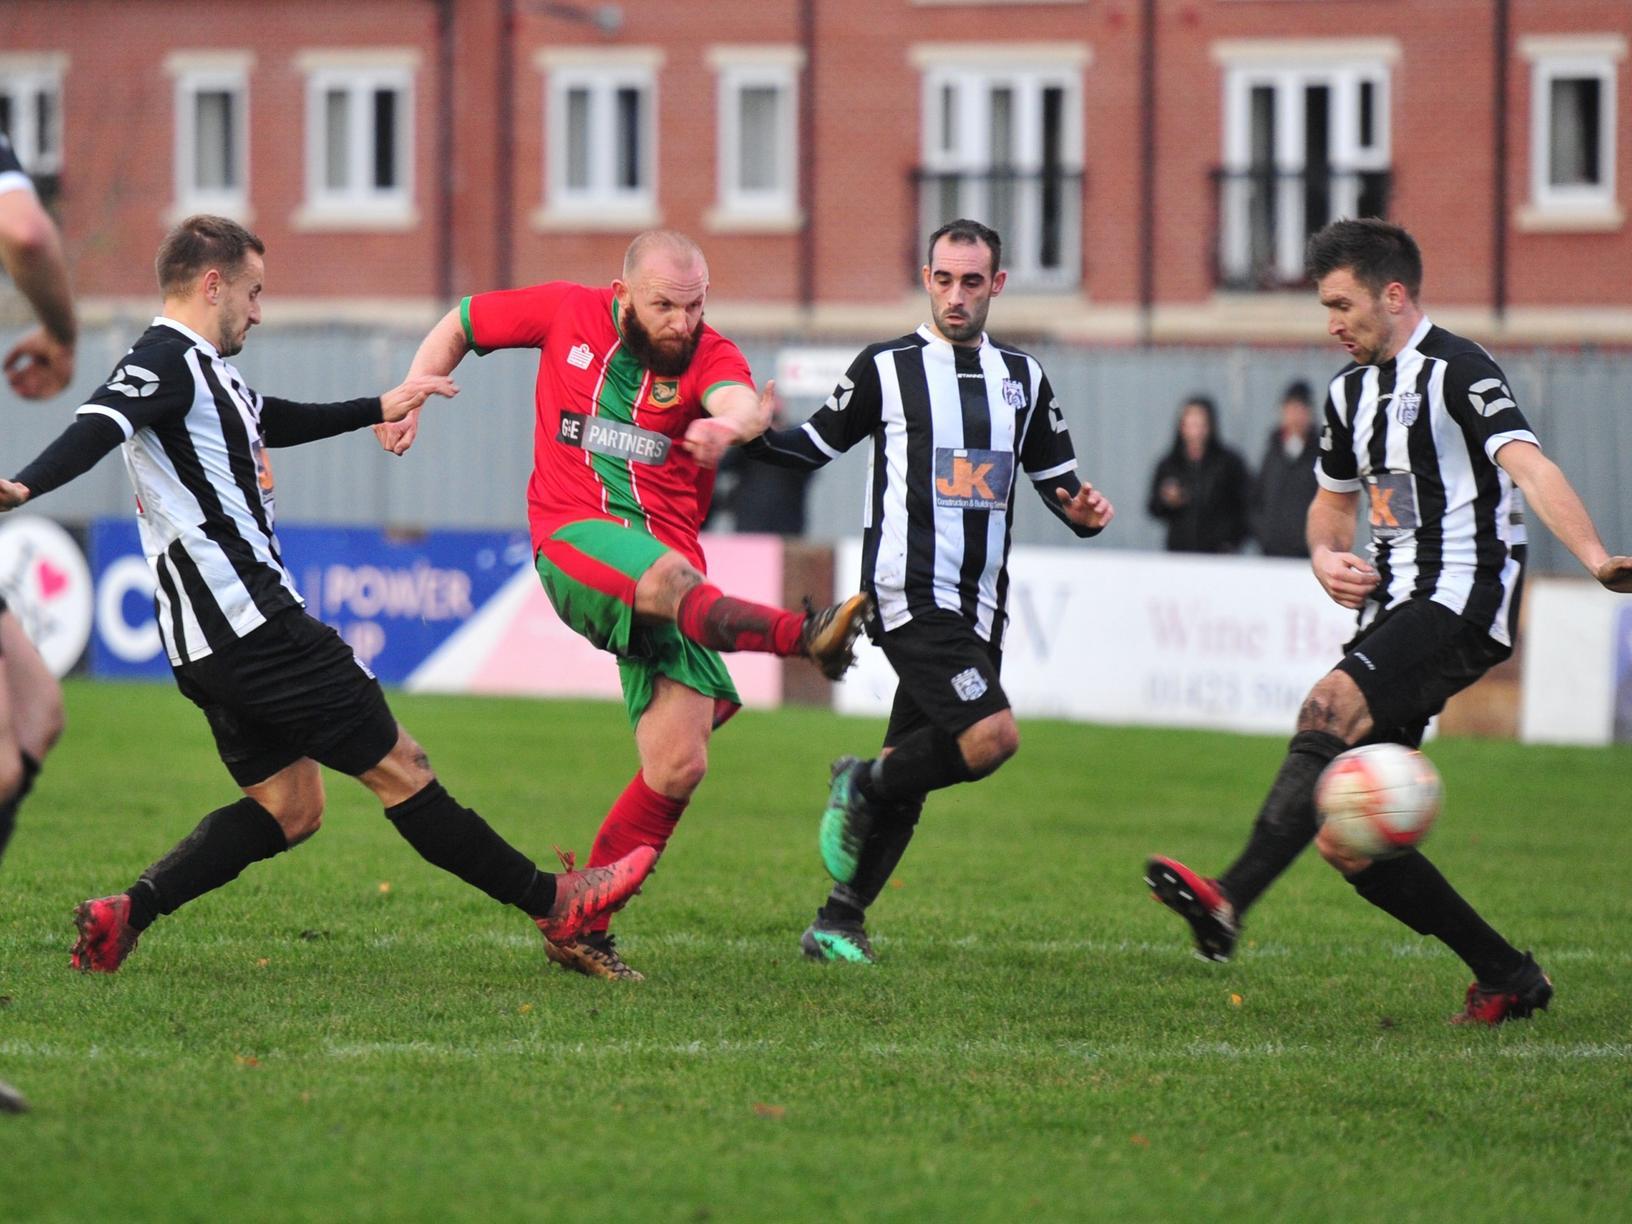 Josh Shields shoots at goal during Harrogate Railway's NCEL Division One clash with Brigg Town.